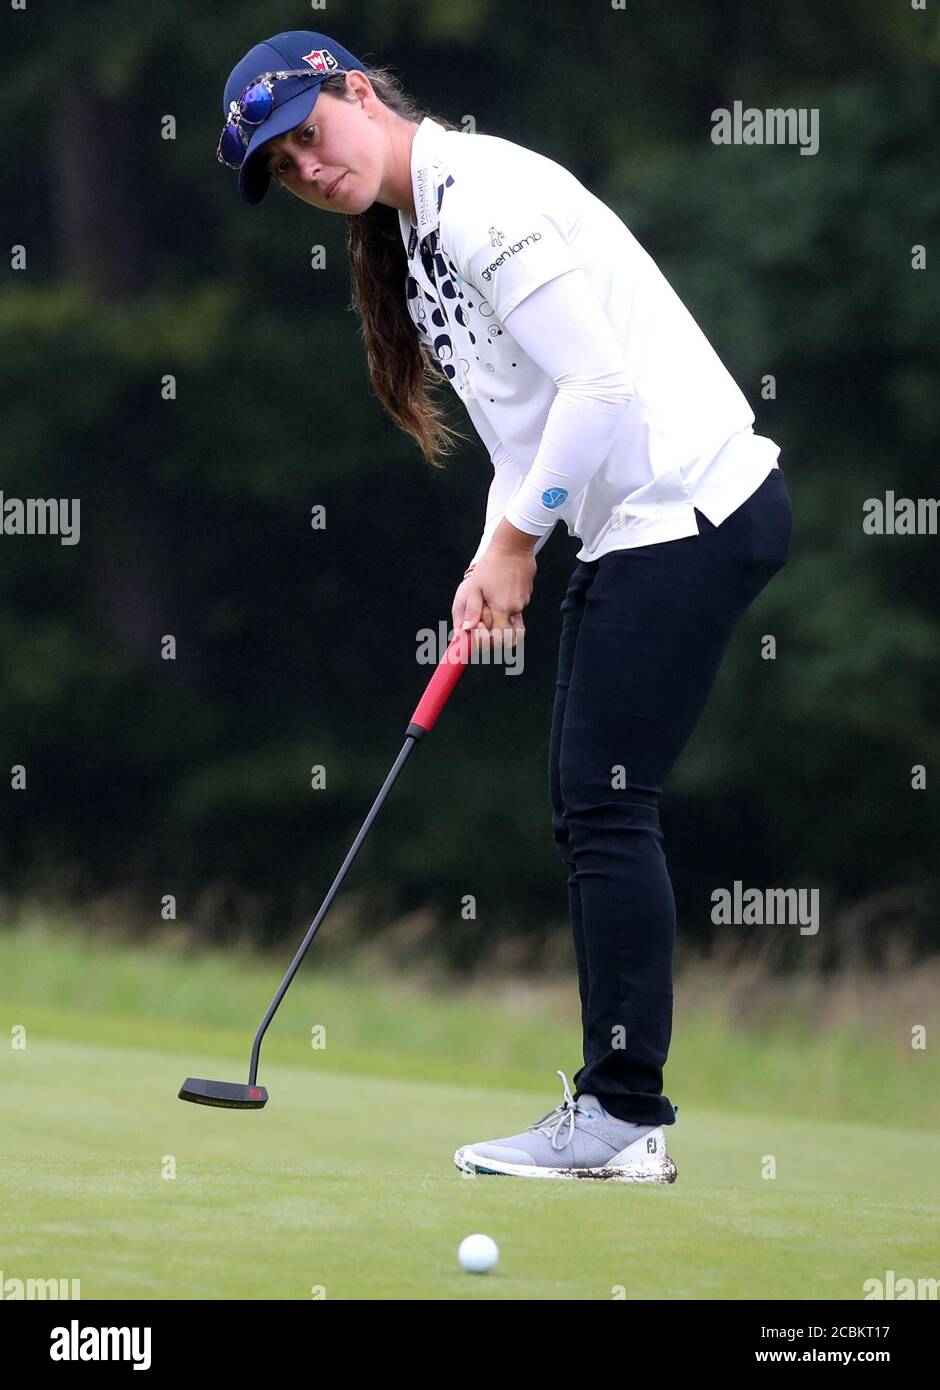 Spain's Nuria Iturrioz on the 1st green during day two of the Aberdeen Standard Investments Ladies Scottish Open at The Renaissance Club, North Berwick. Stock Photo